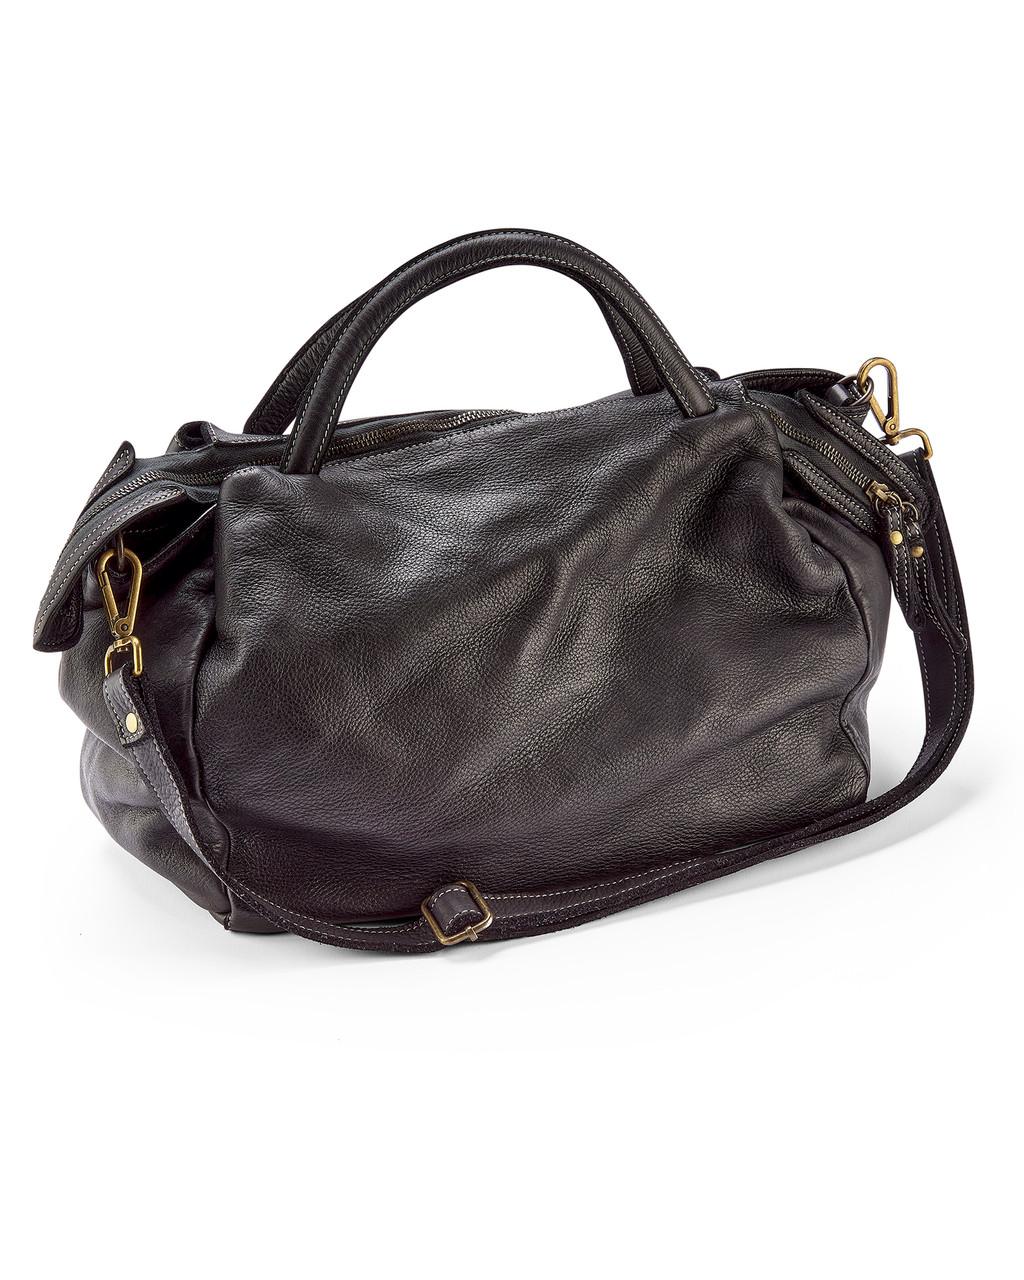 Black Satchel bags and purses for Women | Lyst